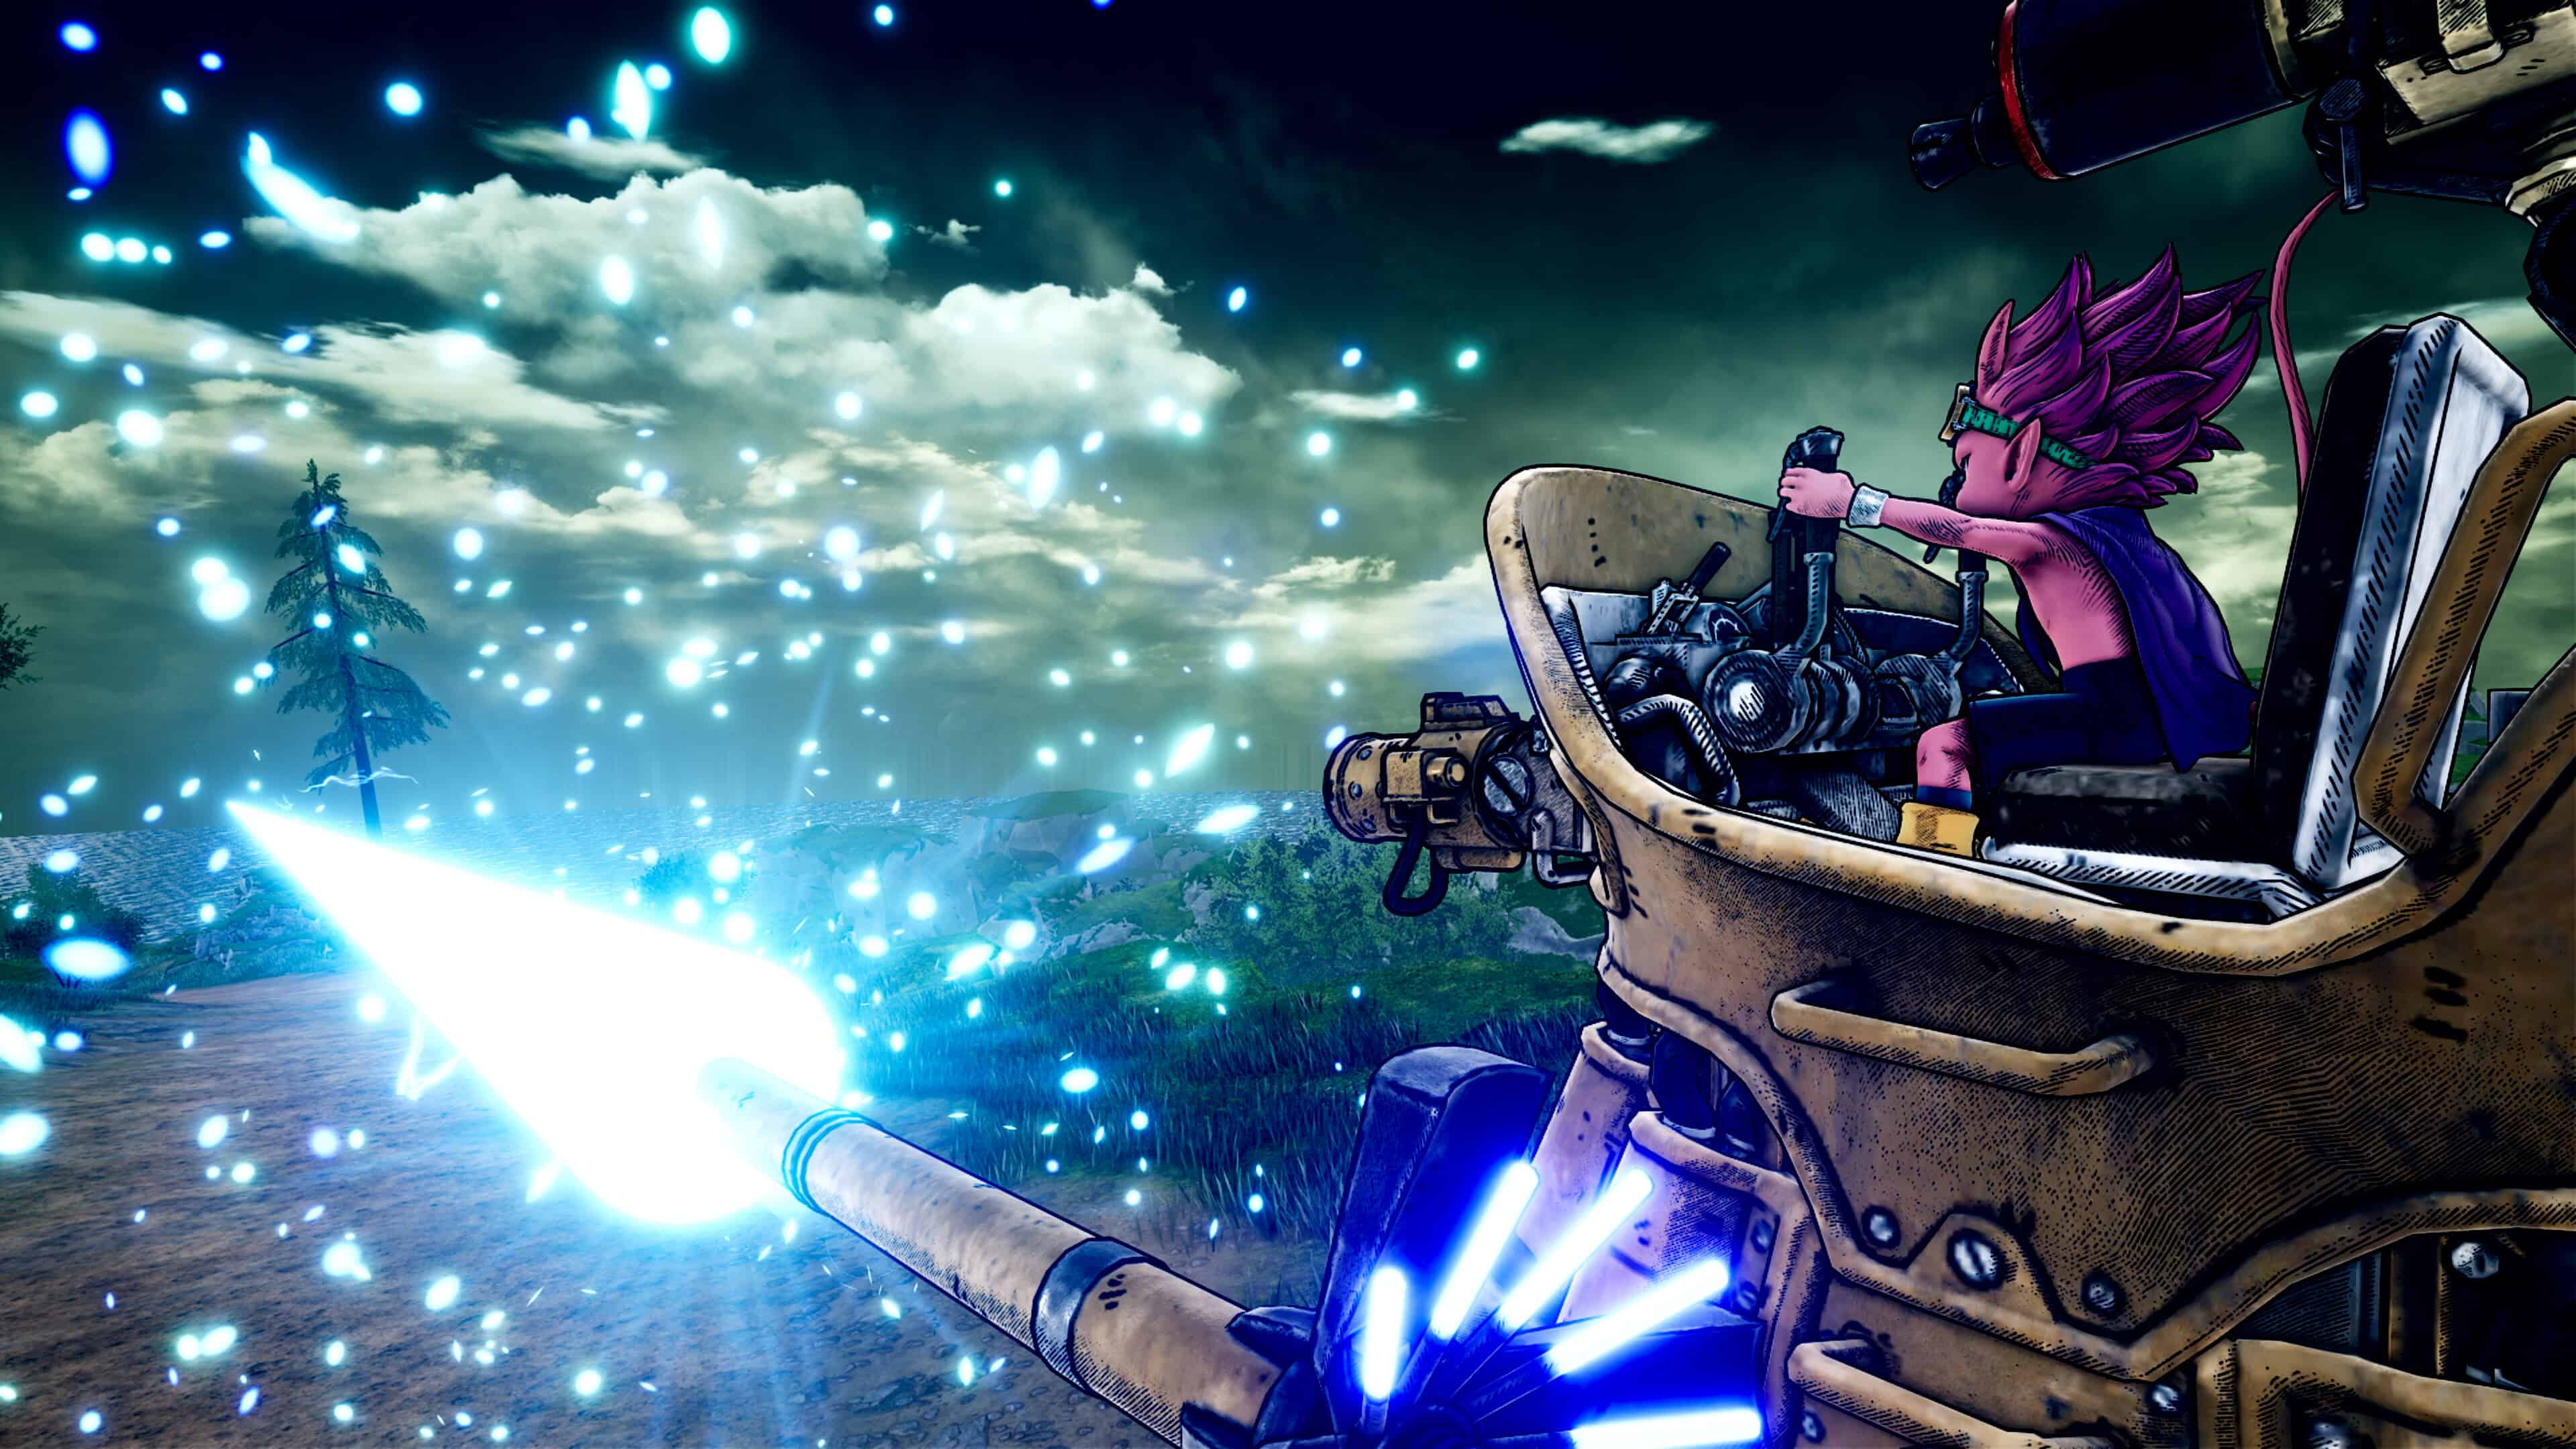 Sand Land trailers: A character inside a tank fires a laser at enemies